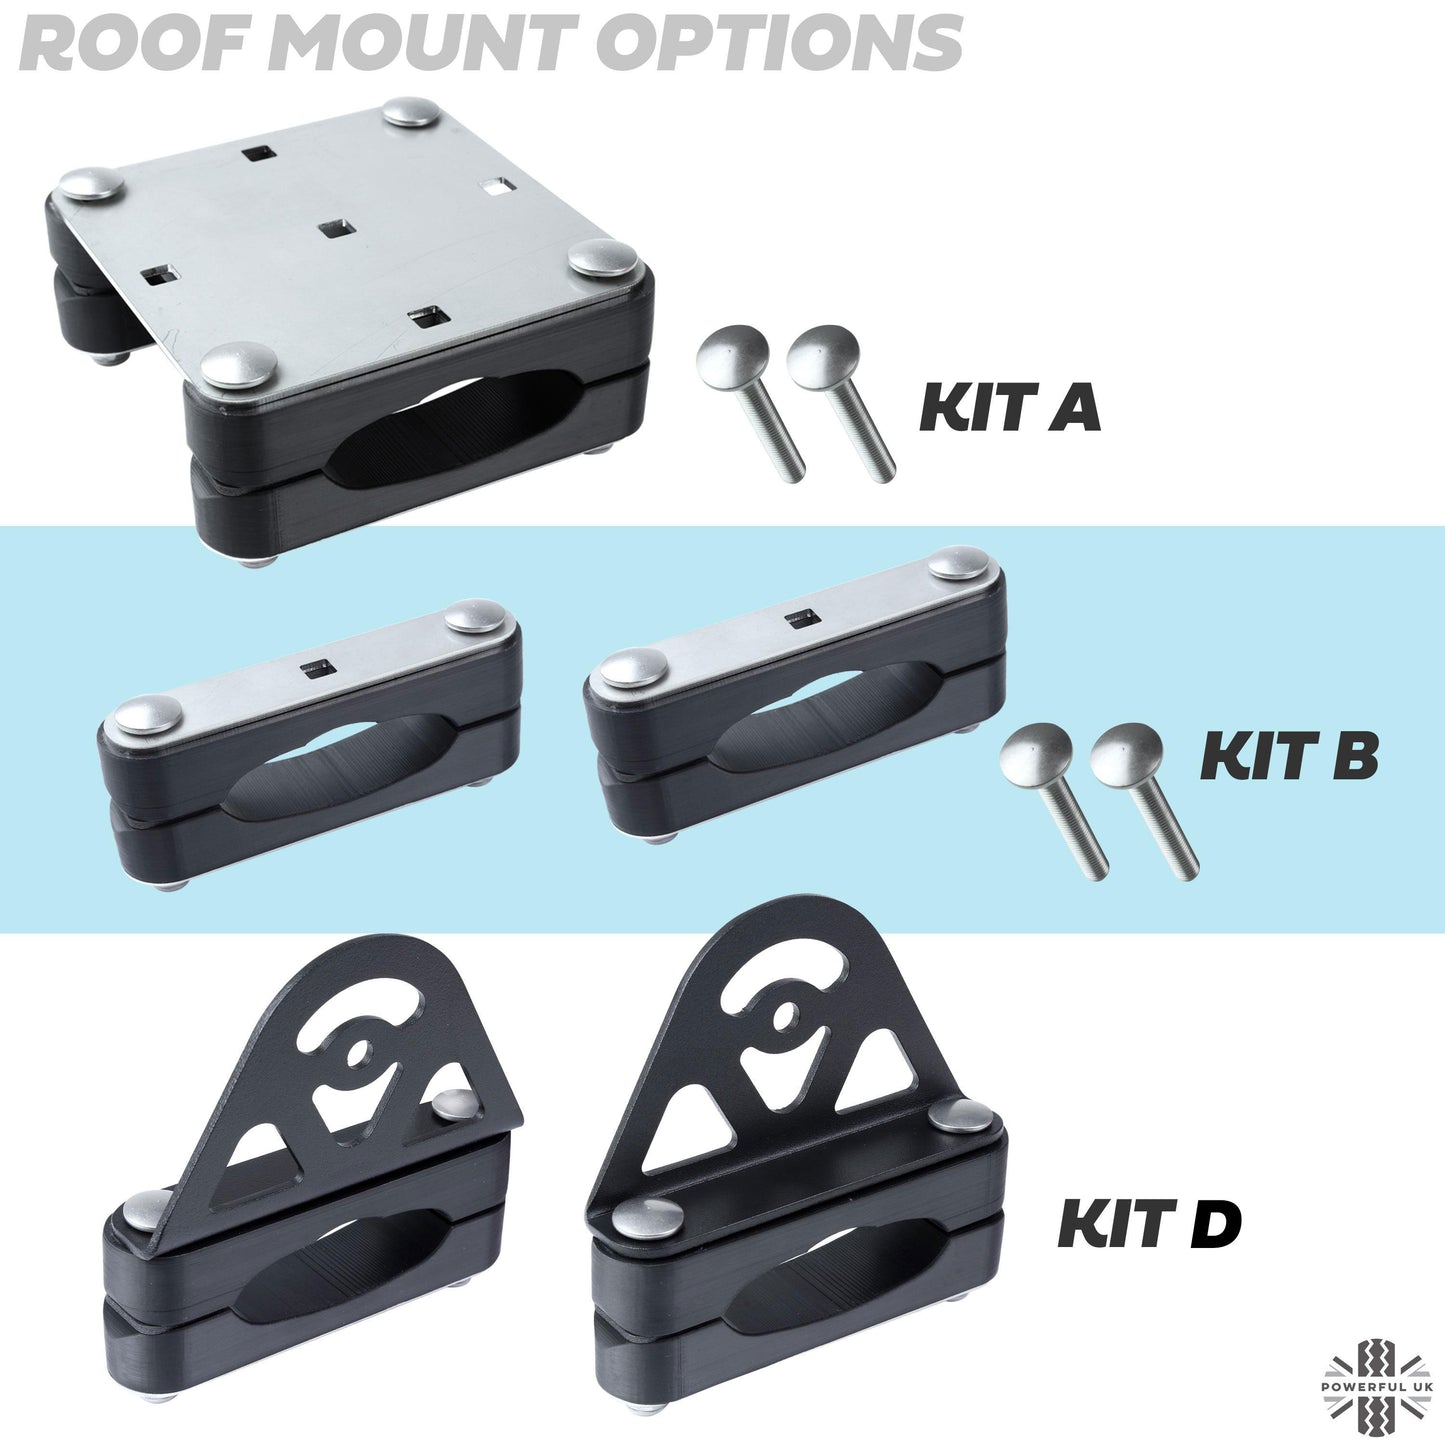 Mount Clamp Kit for the Land Rover Freelander 2 'AFTERMARKET Cross Bars' - Kit A - Stainless Steel Top